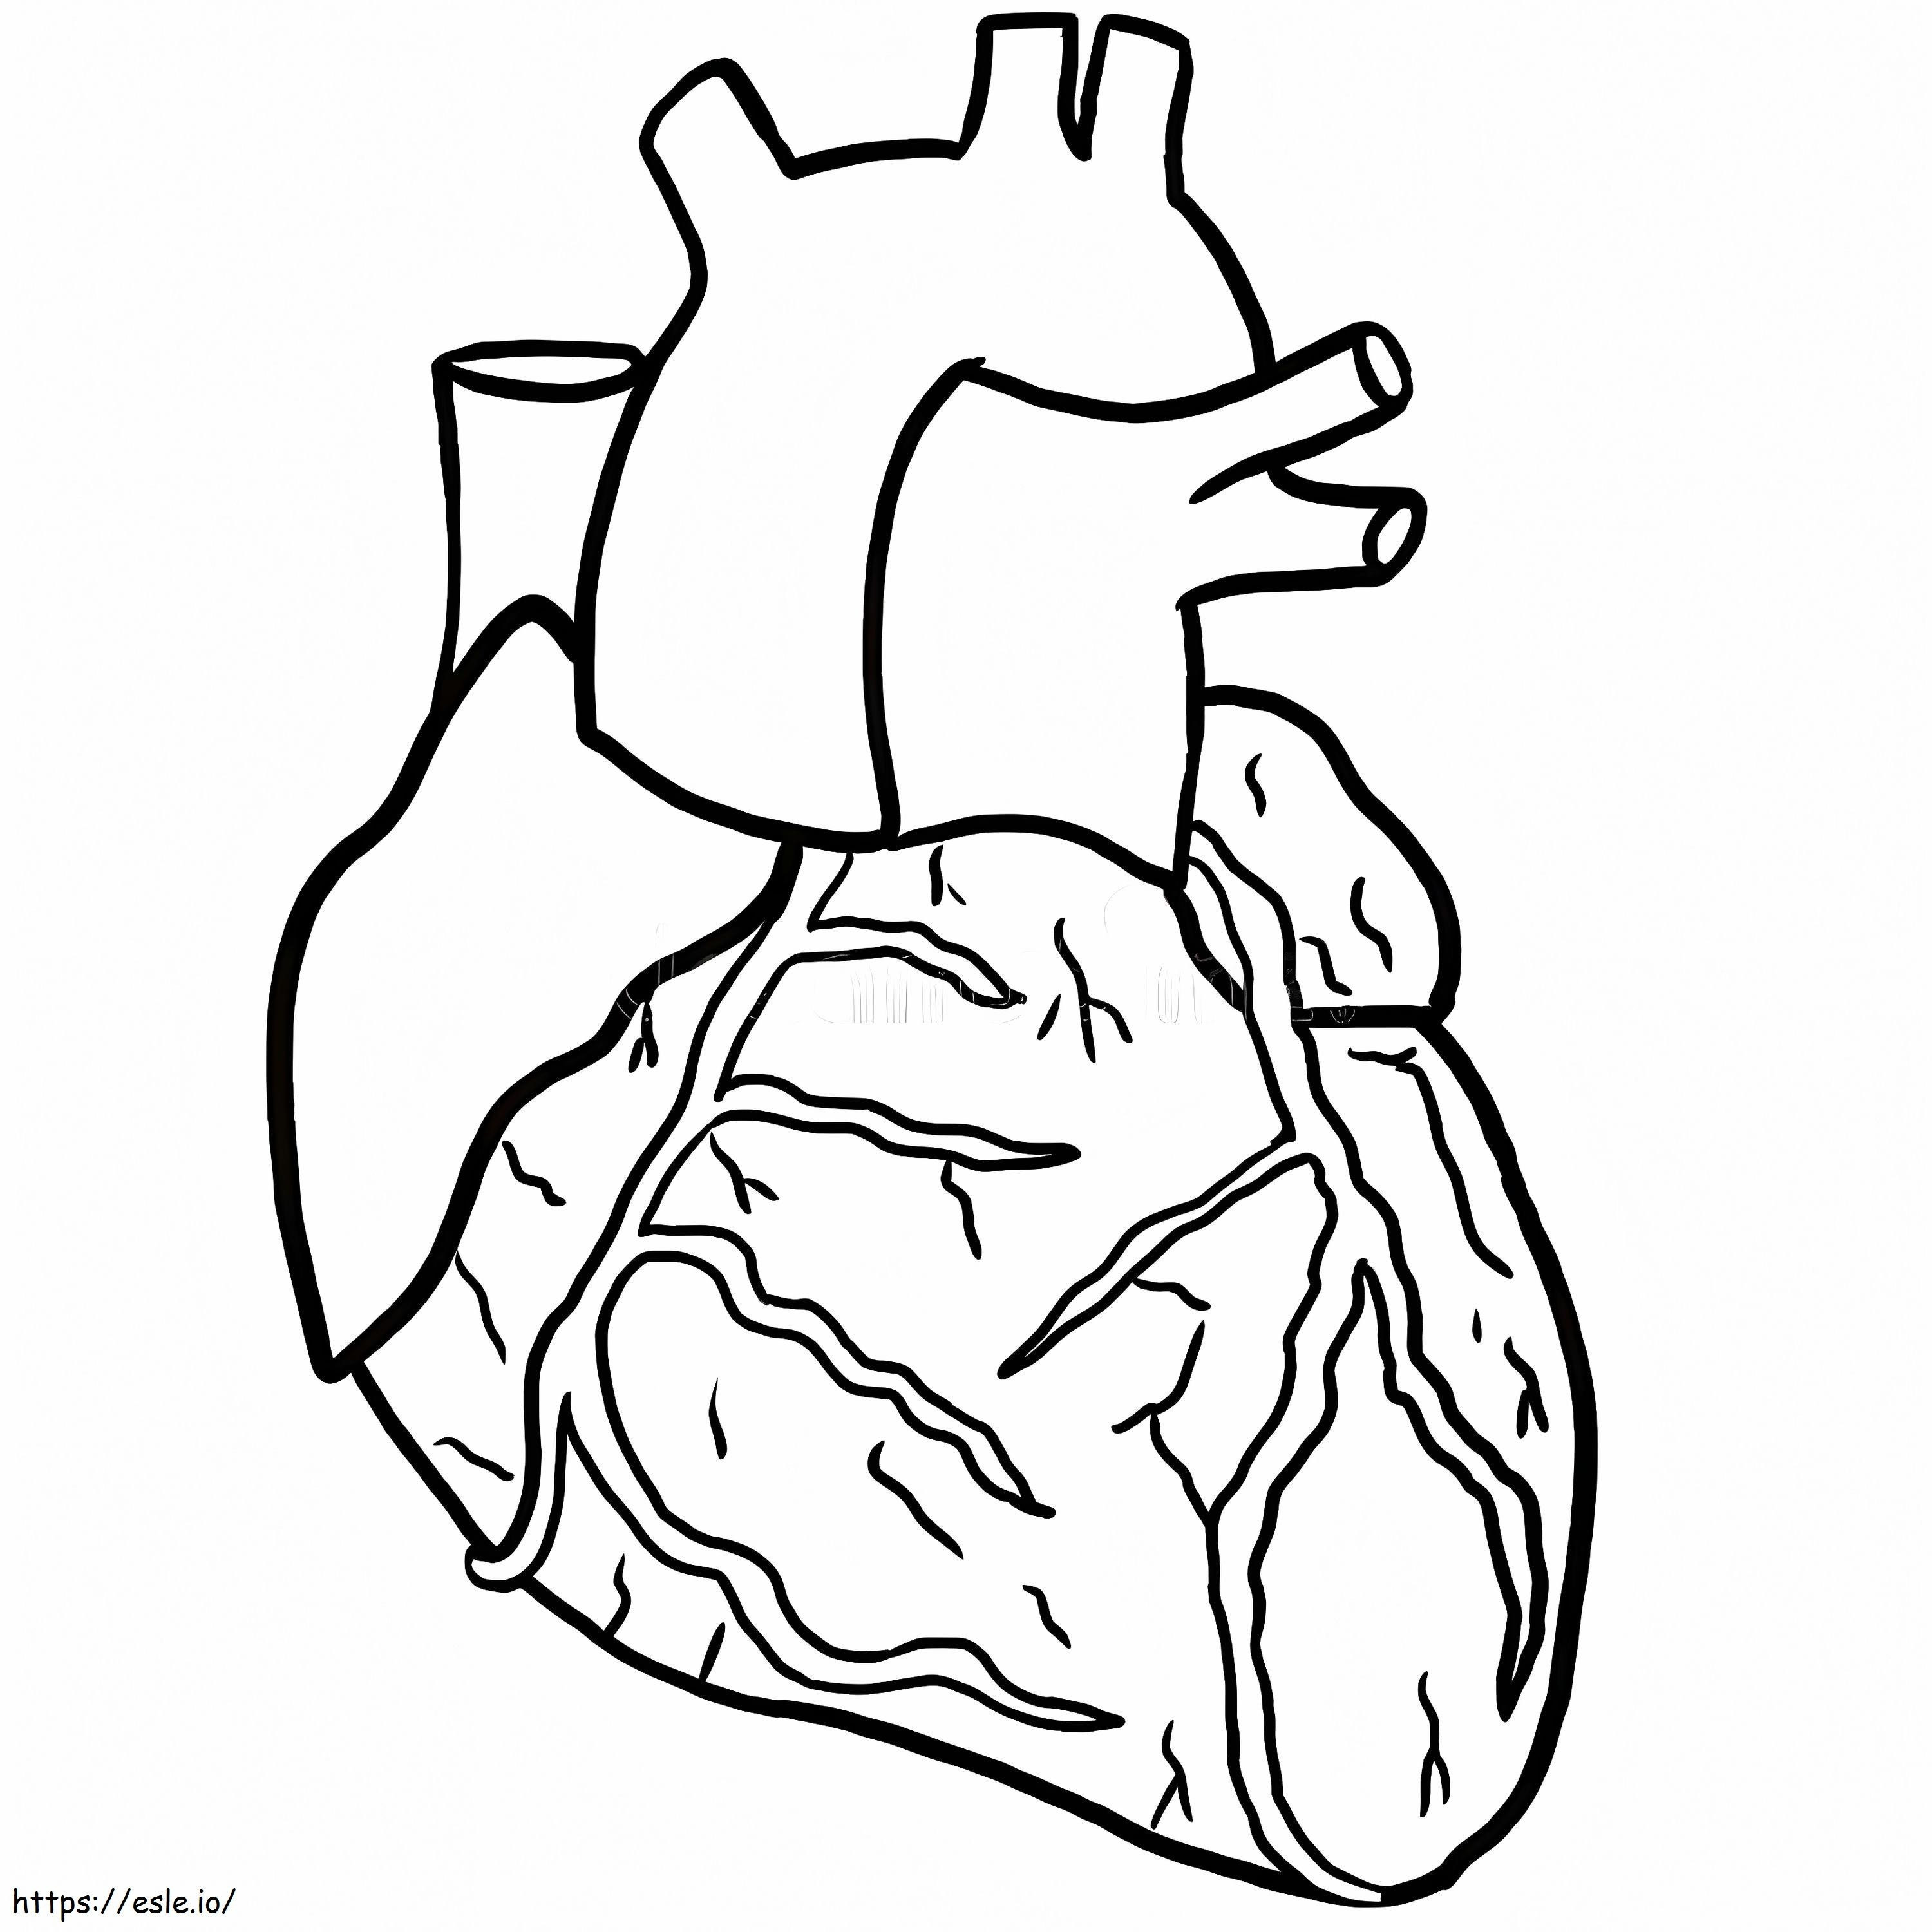 Anatomical Heart coloring page